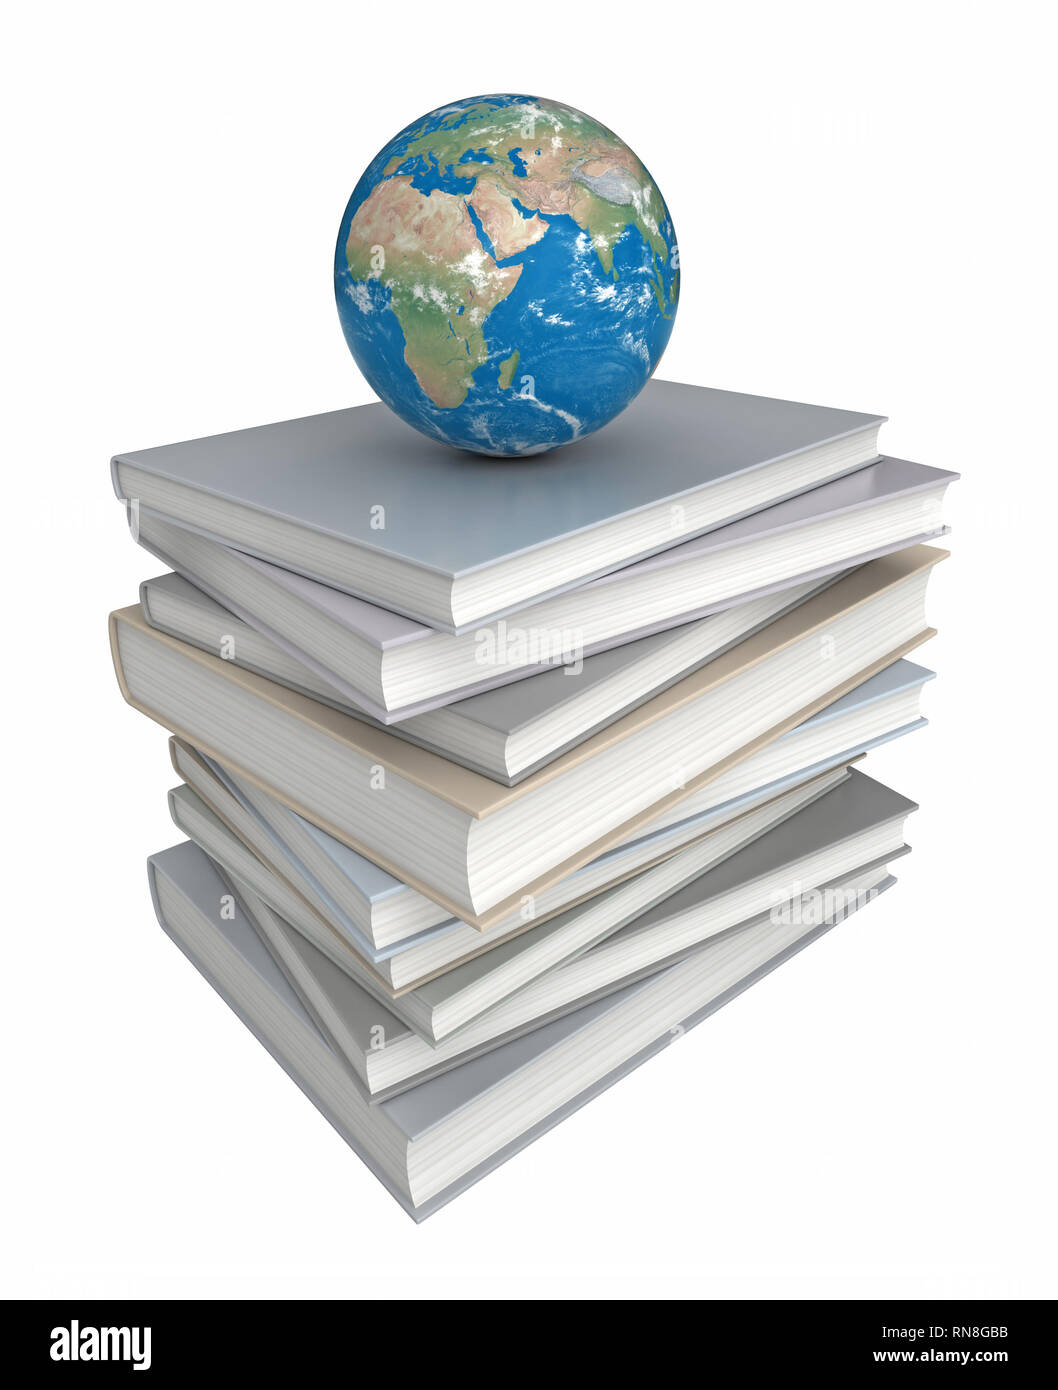 Conceptual 3d rendering of earth miniature over pile of books Stock Photo